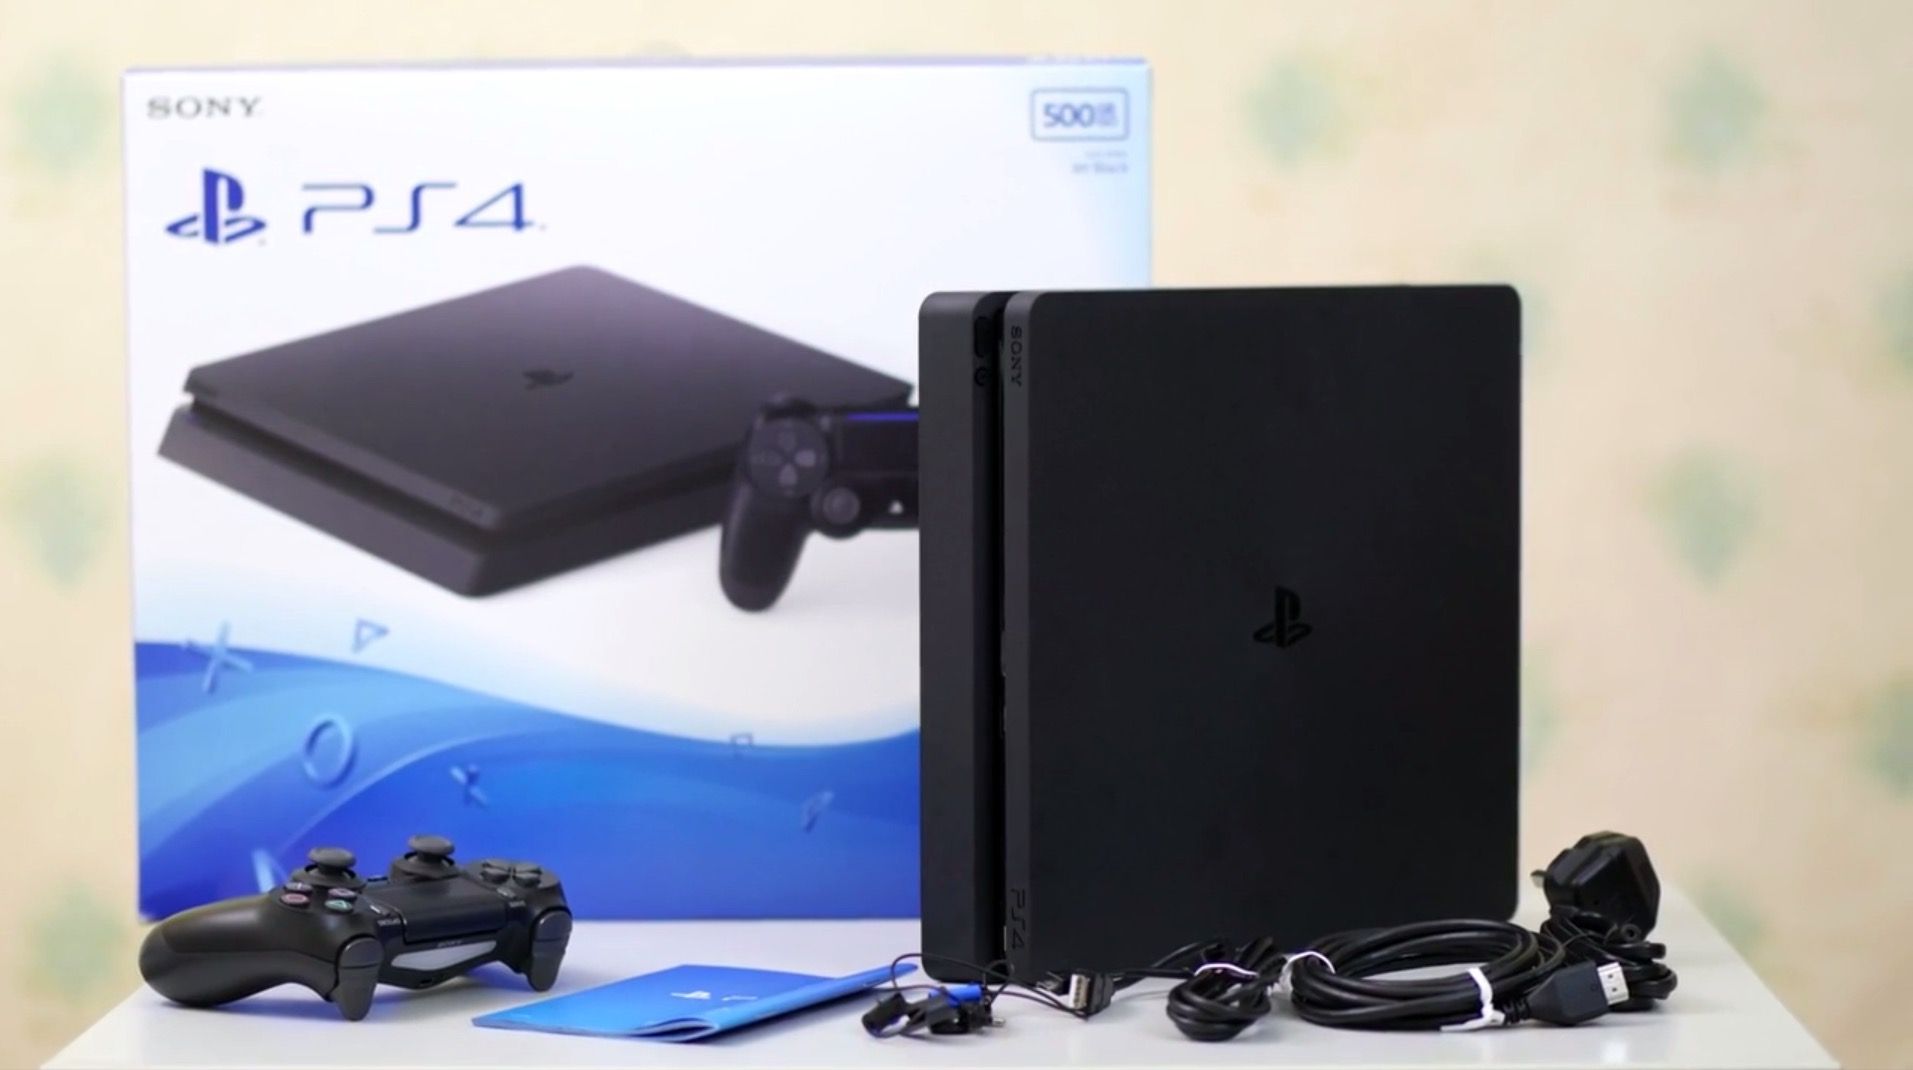 PS4 Slim release date, controller, price, design and everything we know so